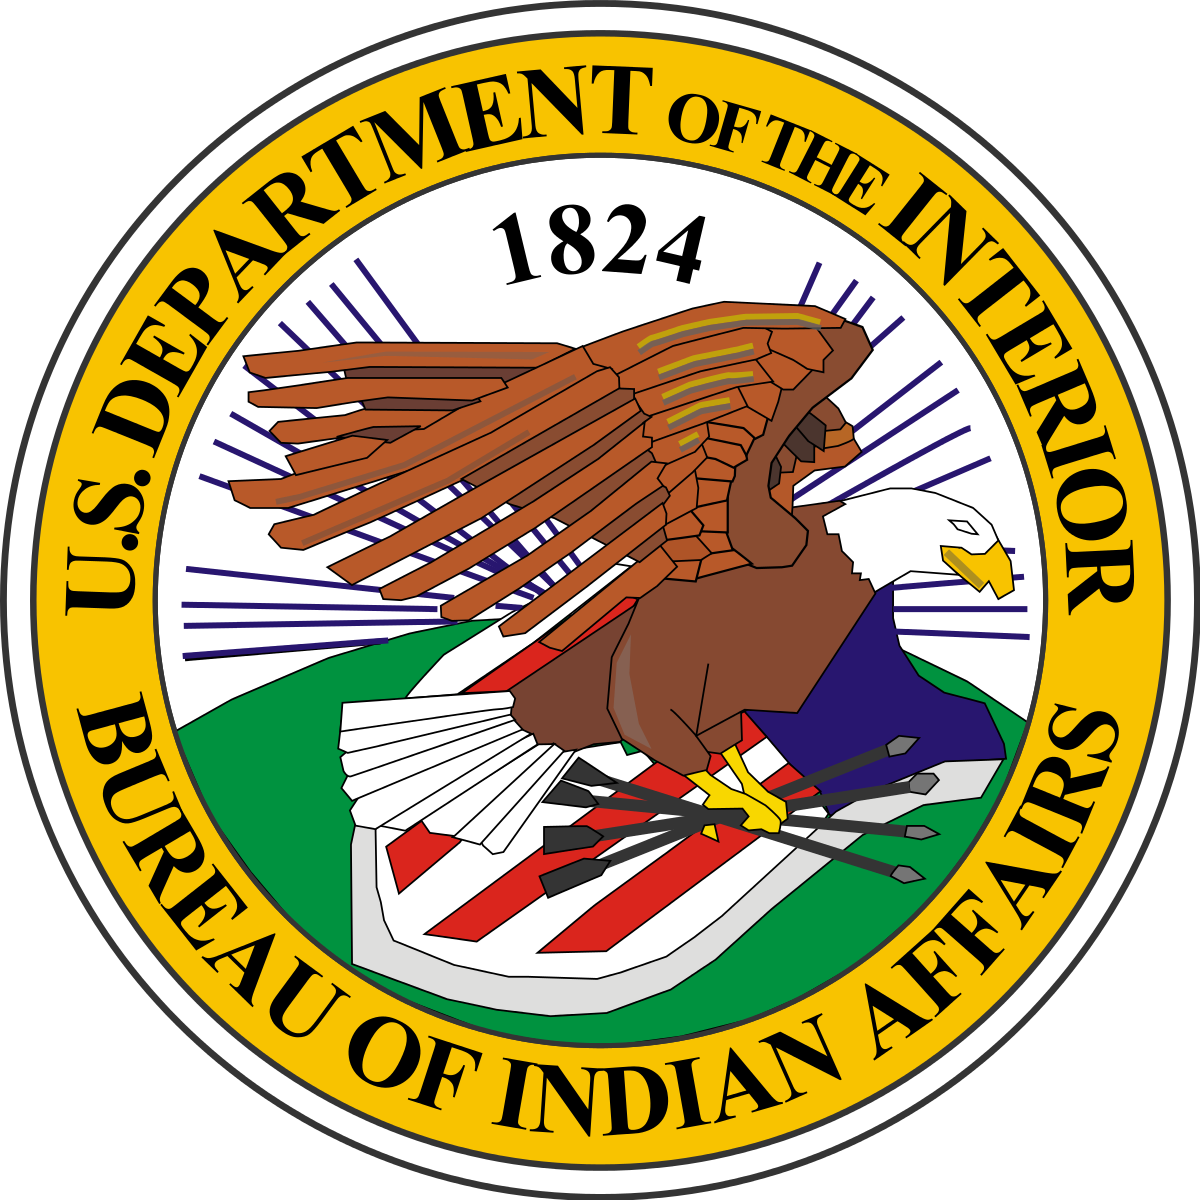 Bureau of Indian Affairs logo with link to web site